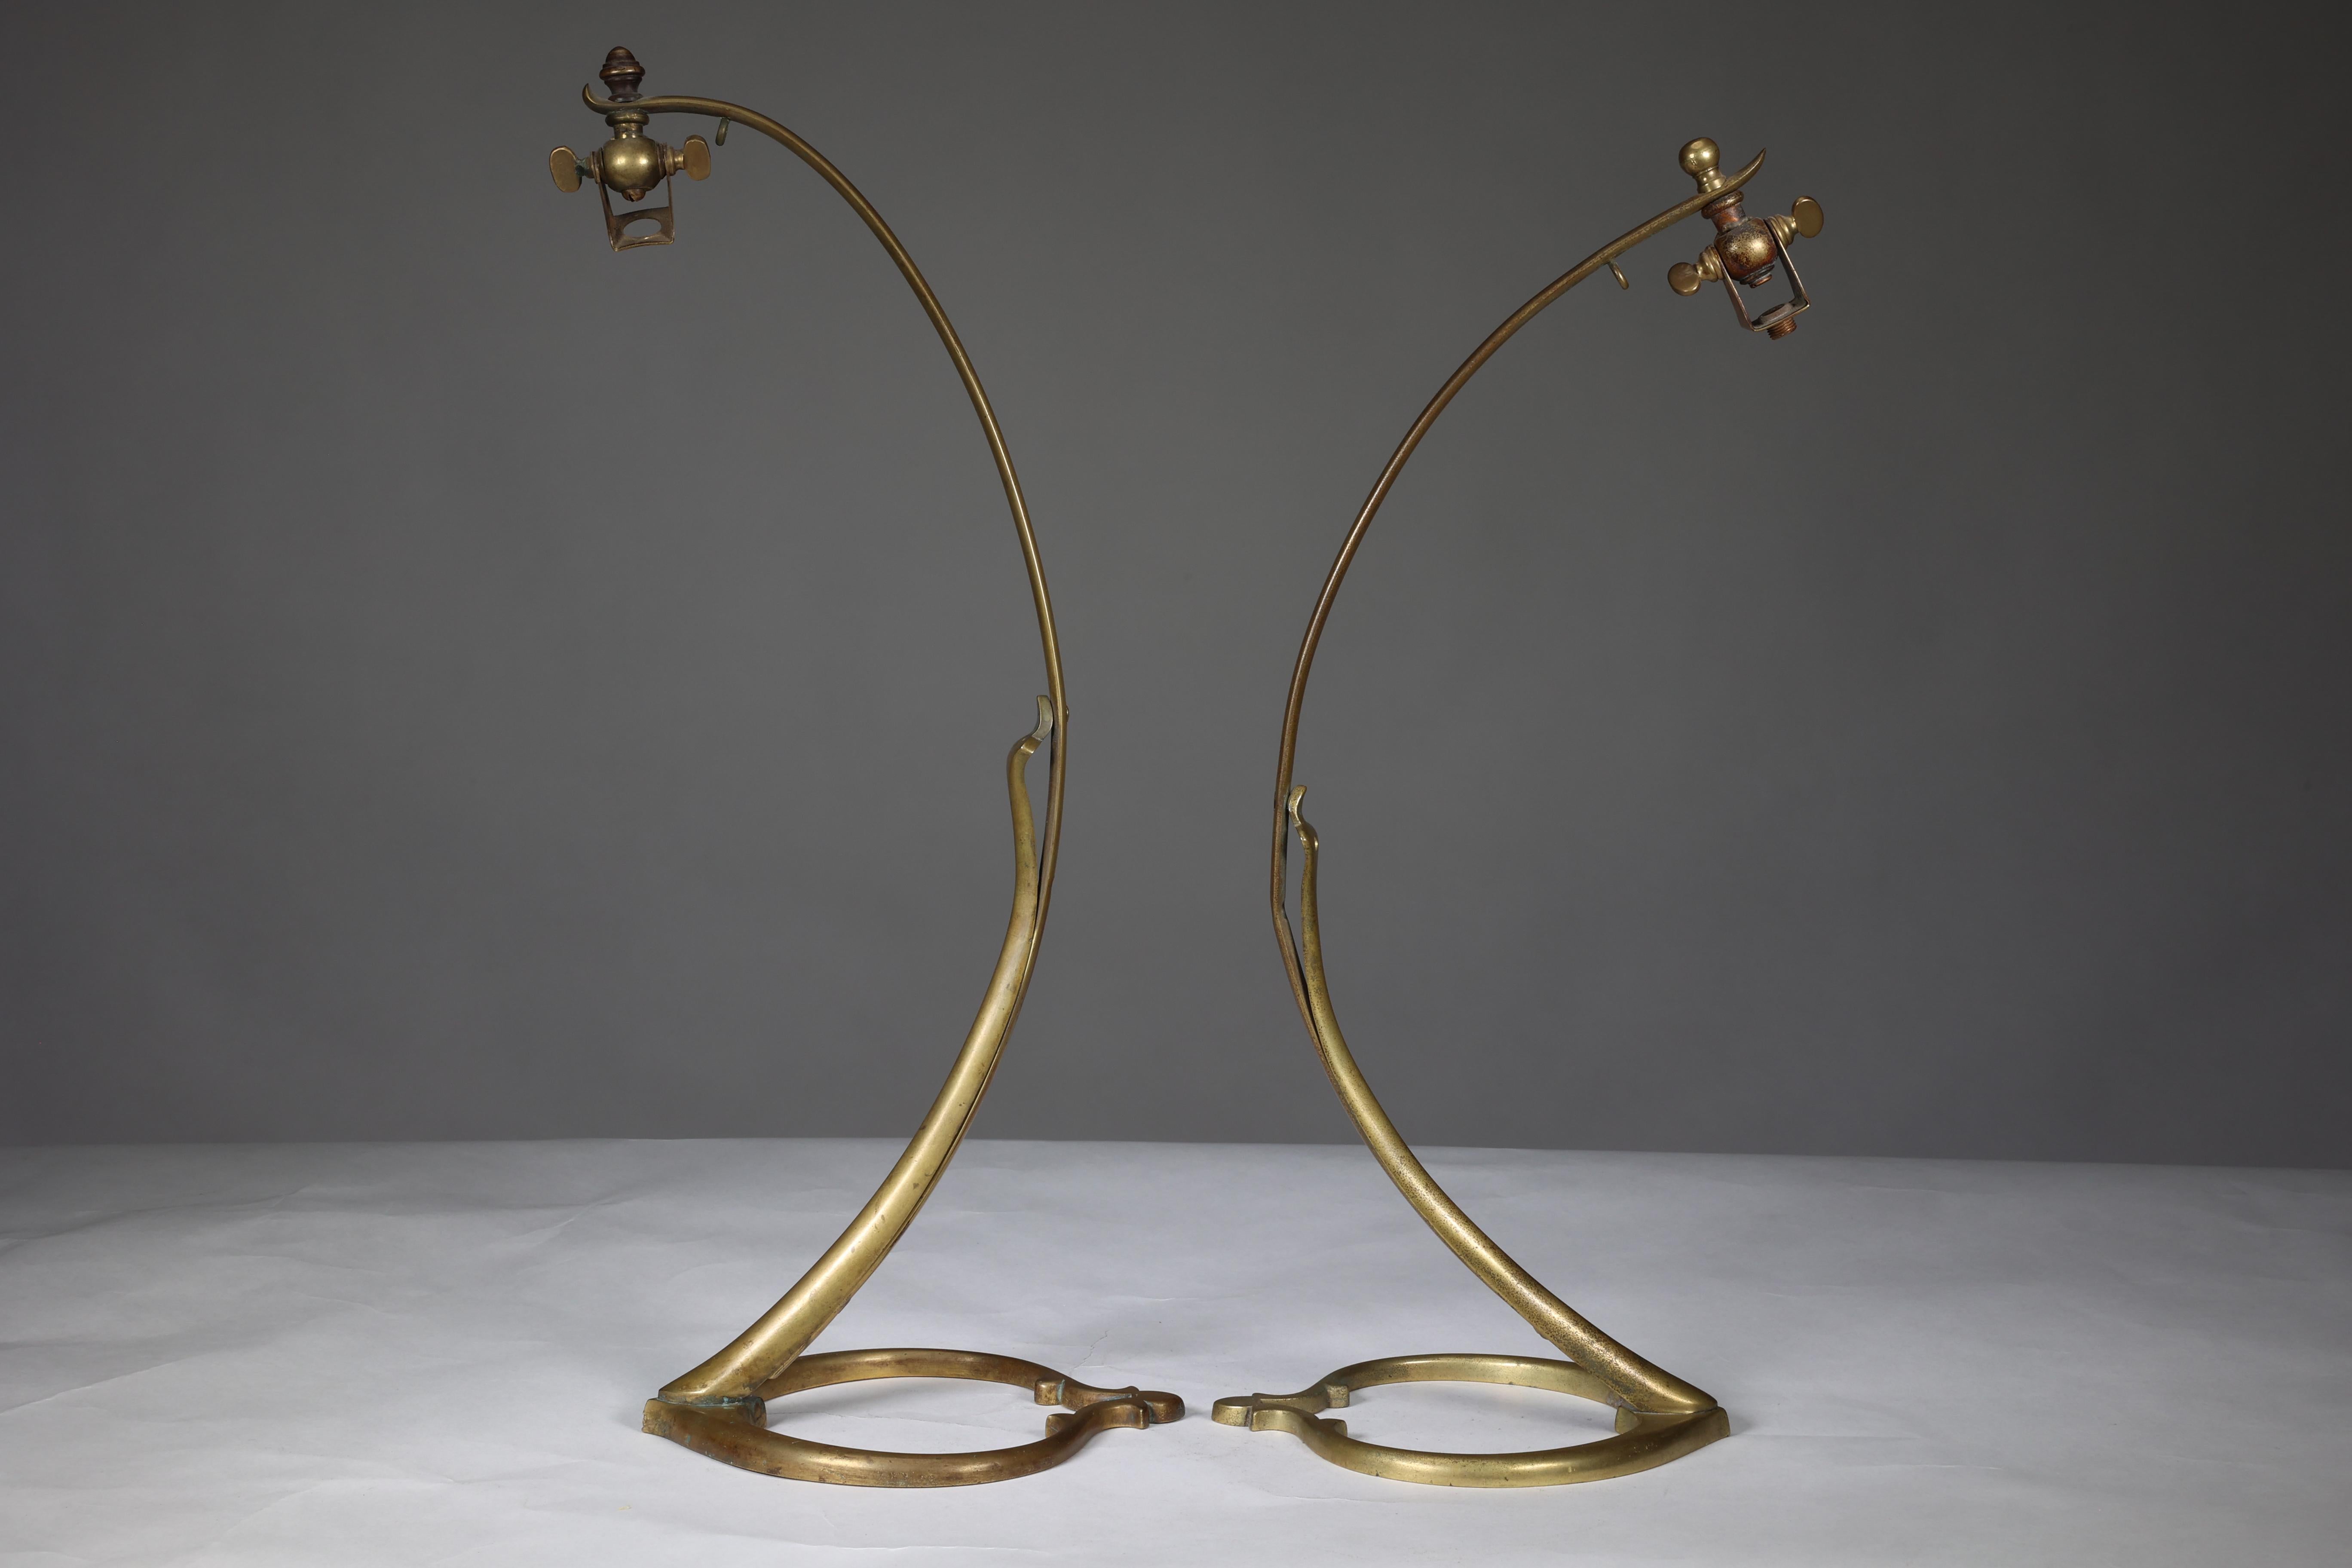 W A S Benson. A near pair of Arts and Crafts brass swan style table lamps with heart shaped bases. WAS Benson Catalogue plate 15, illustration No 1079. We will send enough antique style cable and two lamp holders for your electrician to wire for